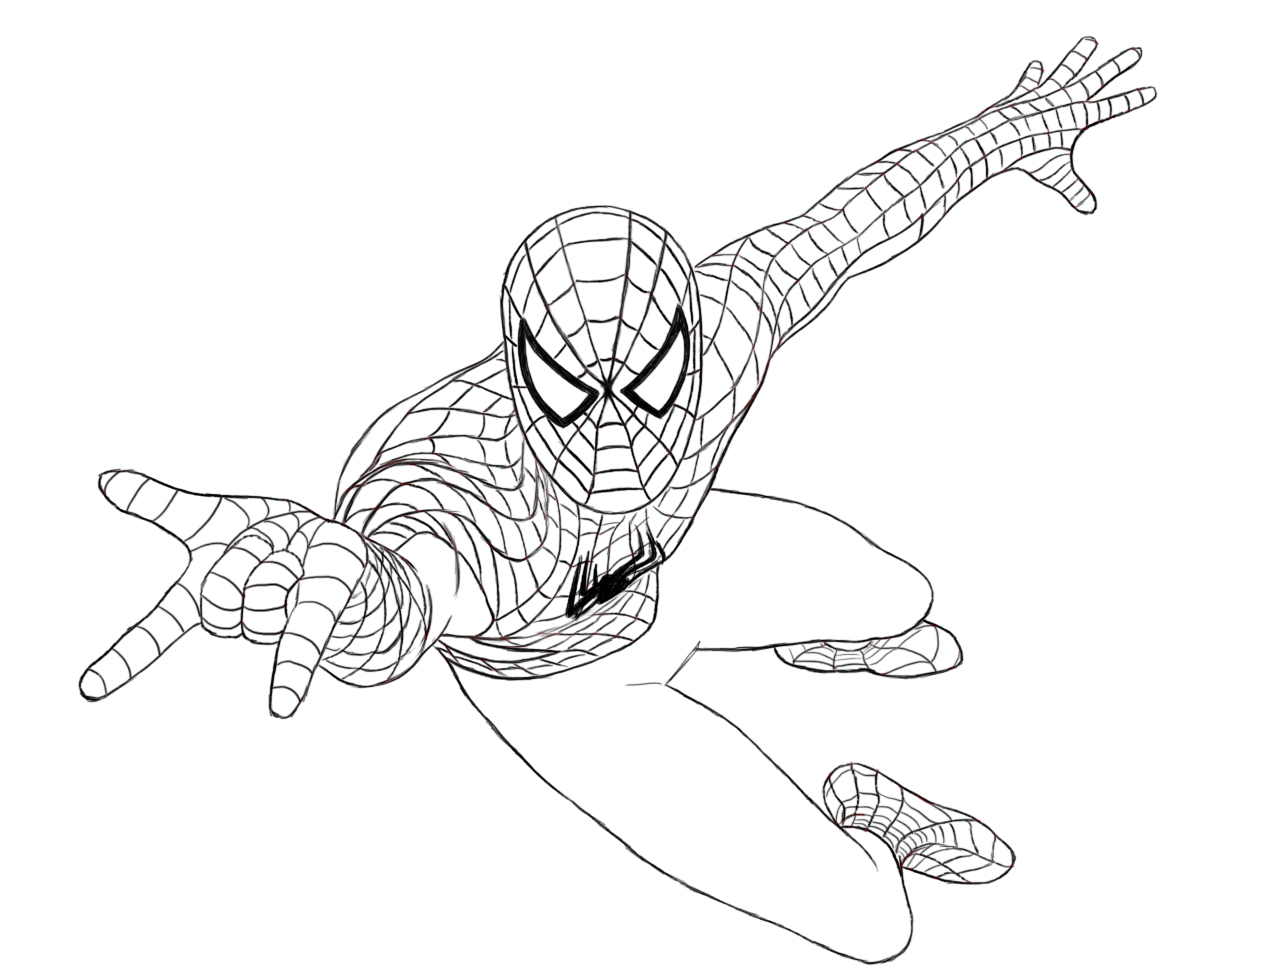 Spiderman Coloring Pages Coloring Page Free Coloring Pages For Kids 10 Free Printable Coloring Pages For Kids Colouring Pages Coloring Pages Of Cars Barbie Coloring Pages